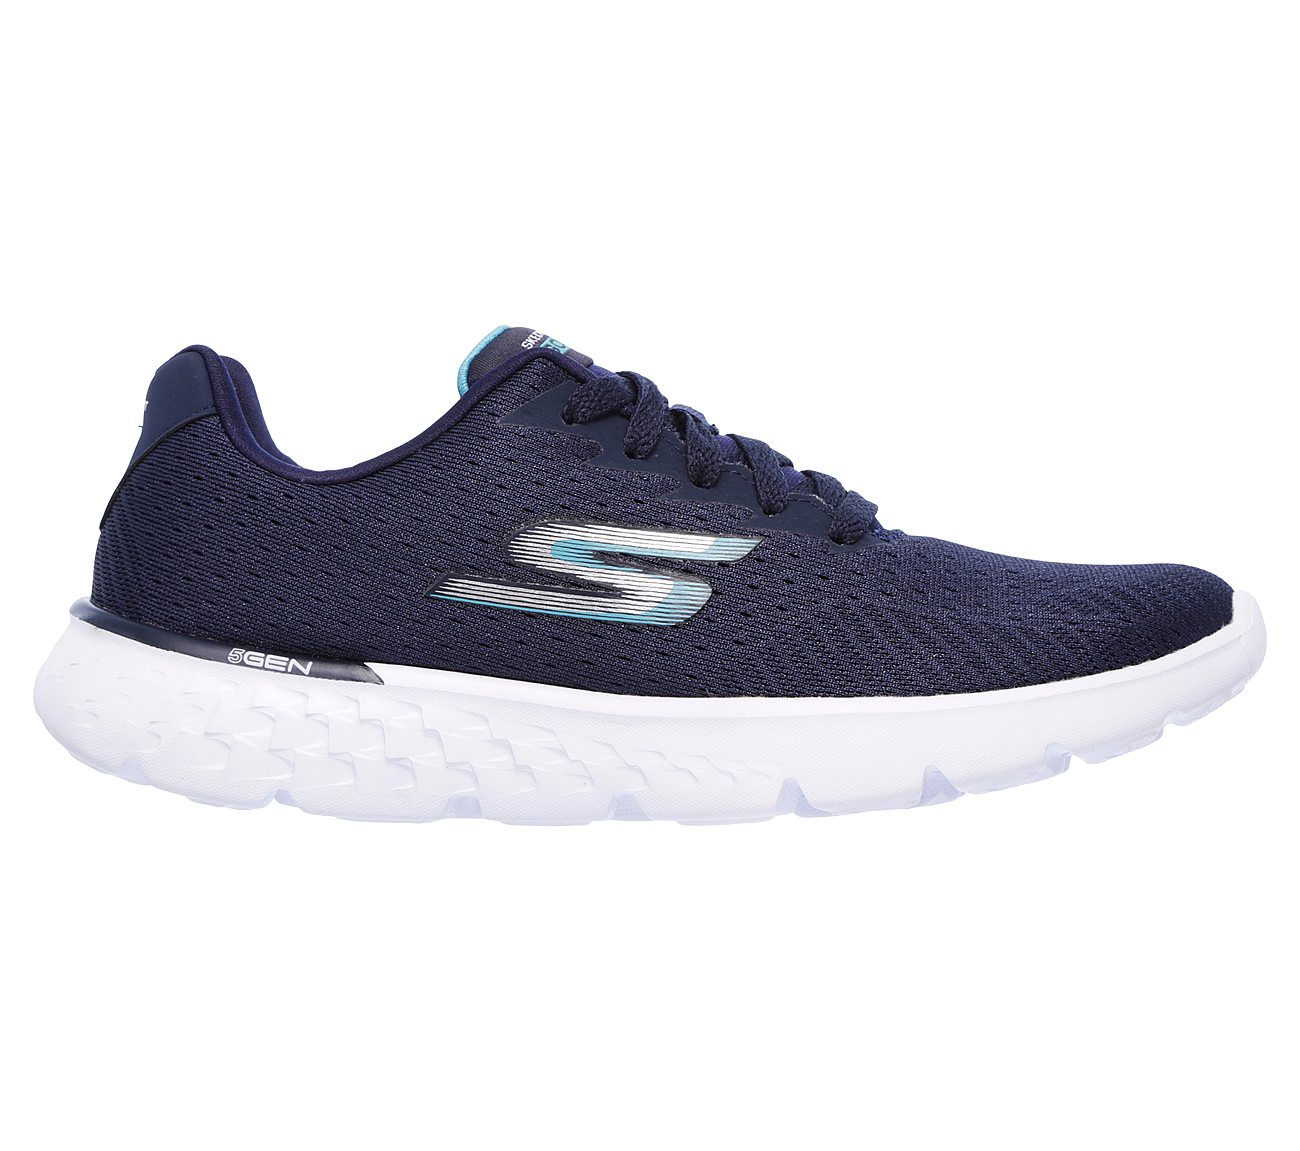 Skechers Navy/White Go Run 400 Sole Running Shoes For Women - Style ID ...